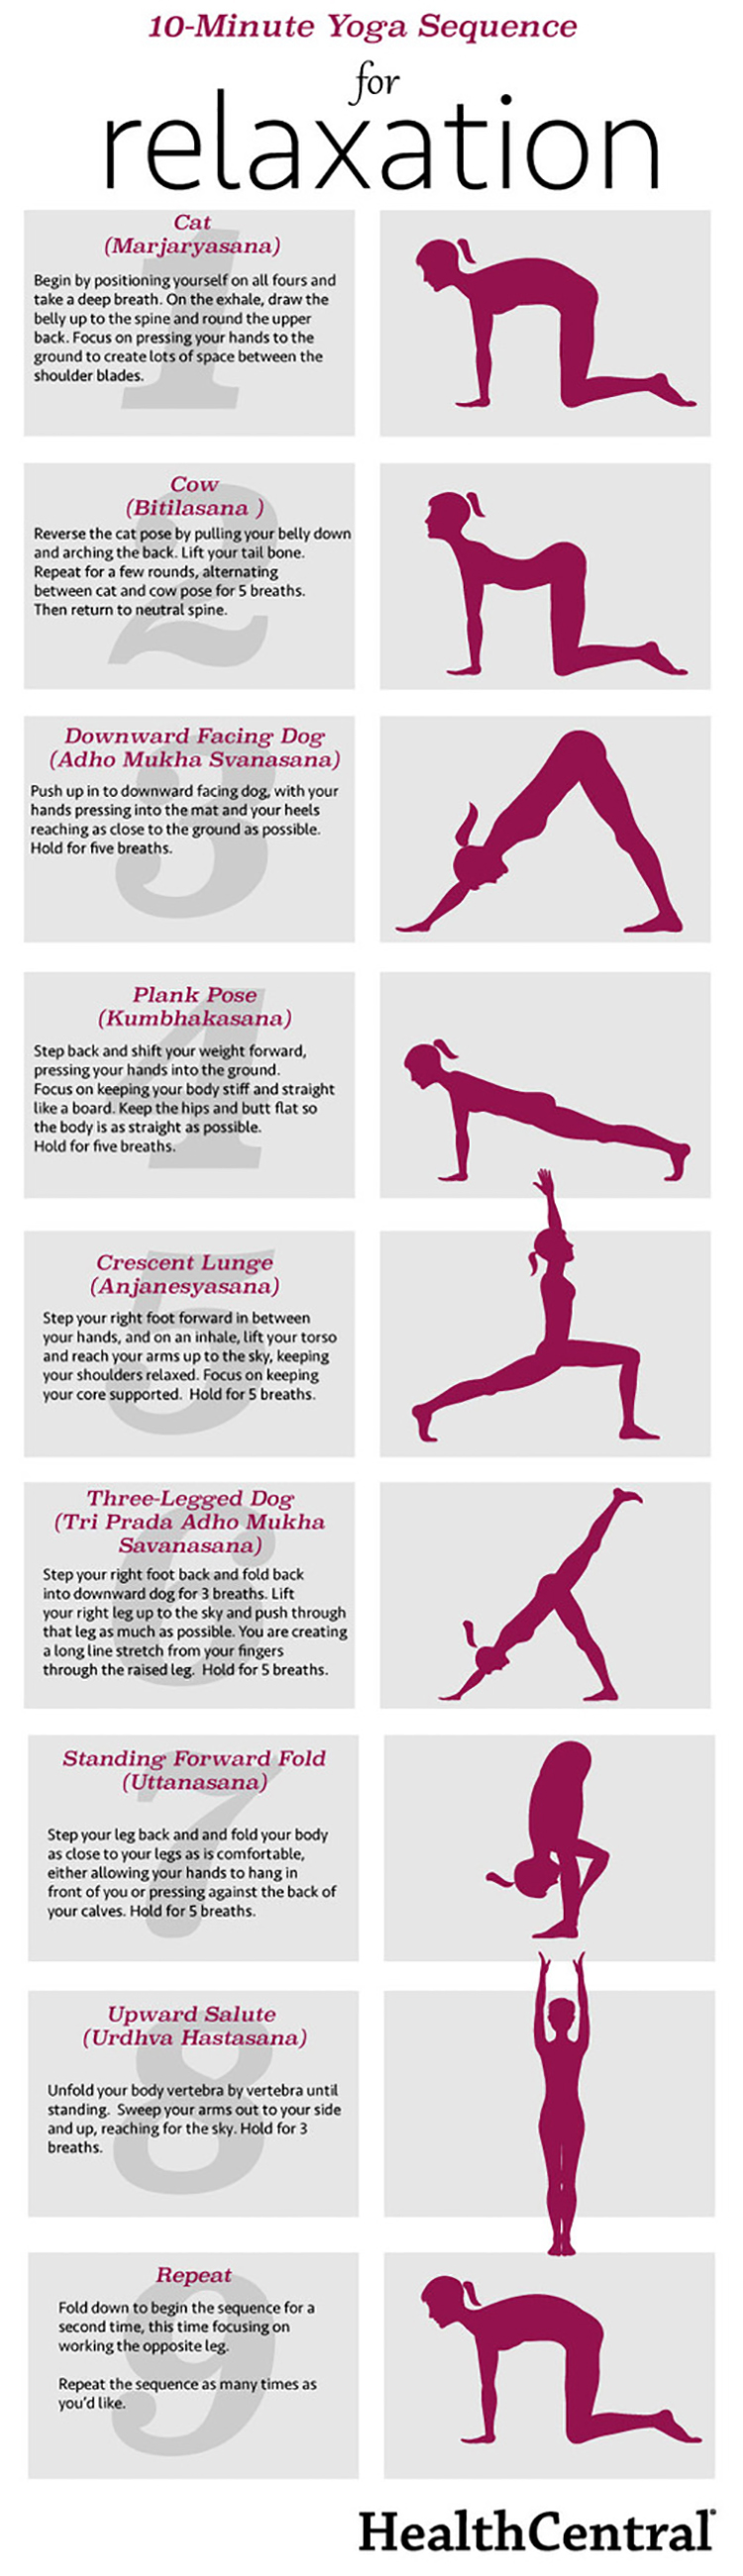 Relax with Yoga: 10 Minutes Is All You Need - Infographic